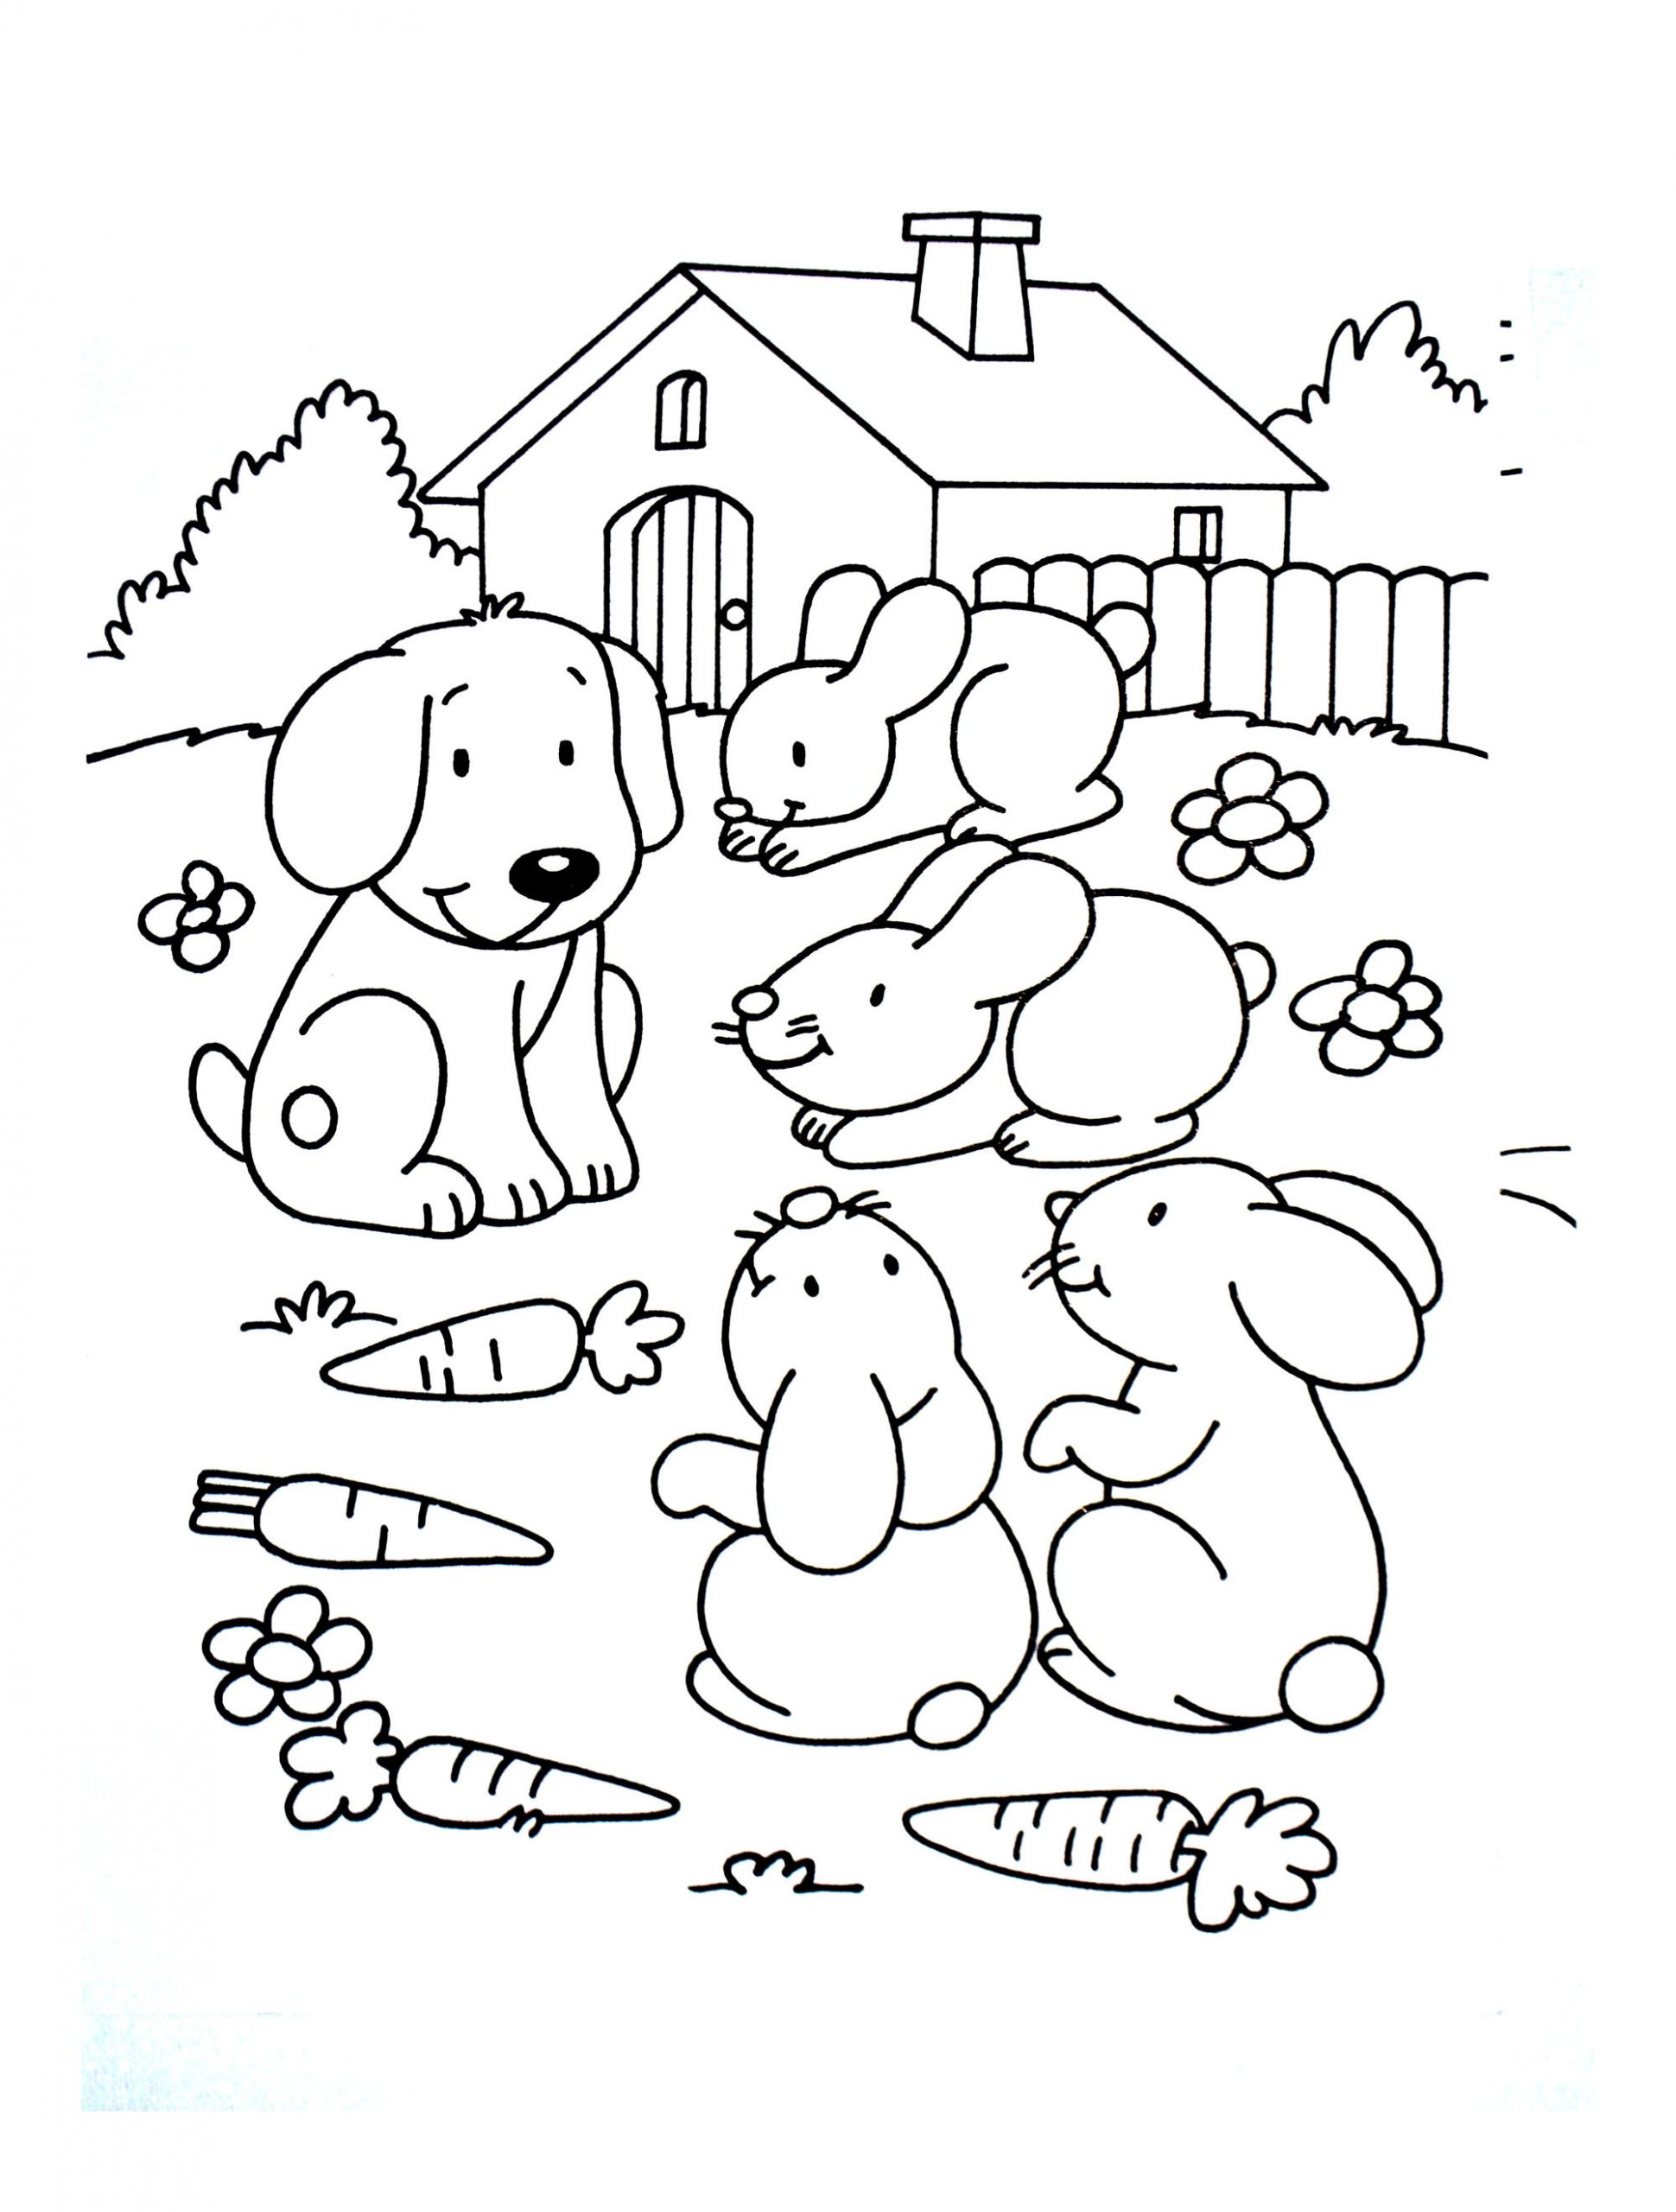 image=dogs Coloring for kids dogs 1